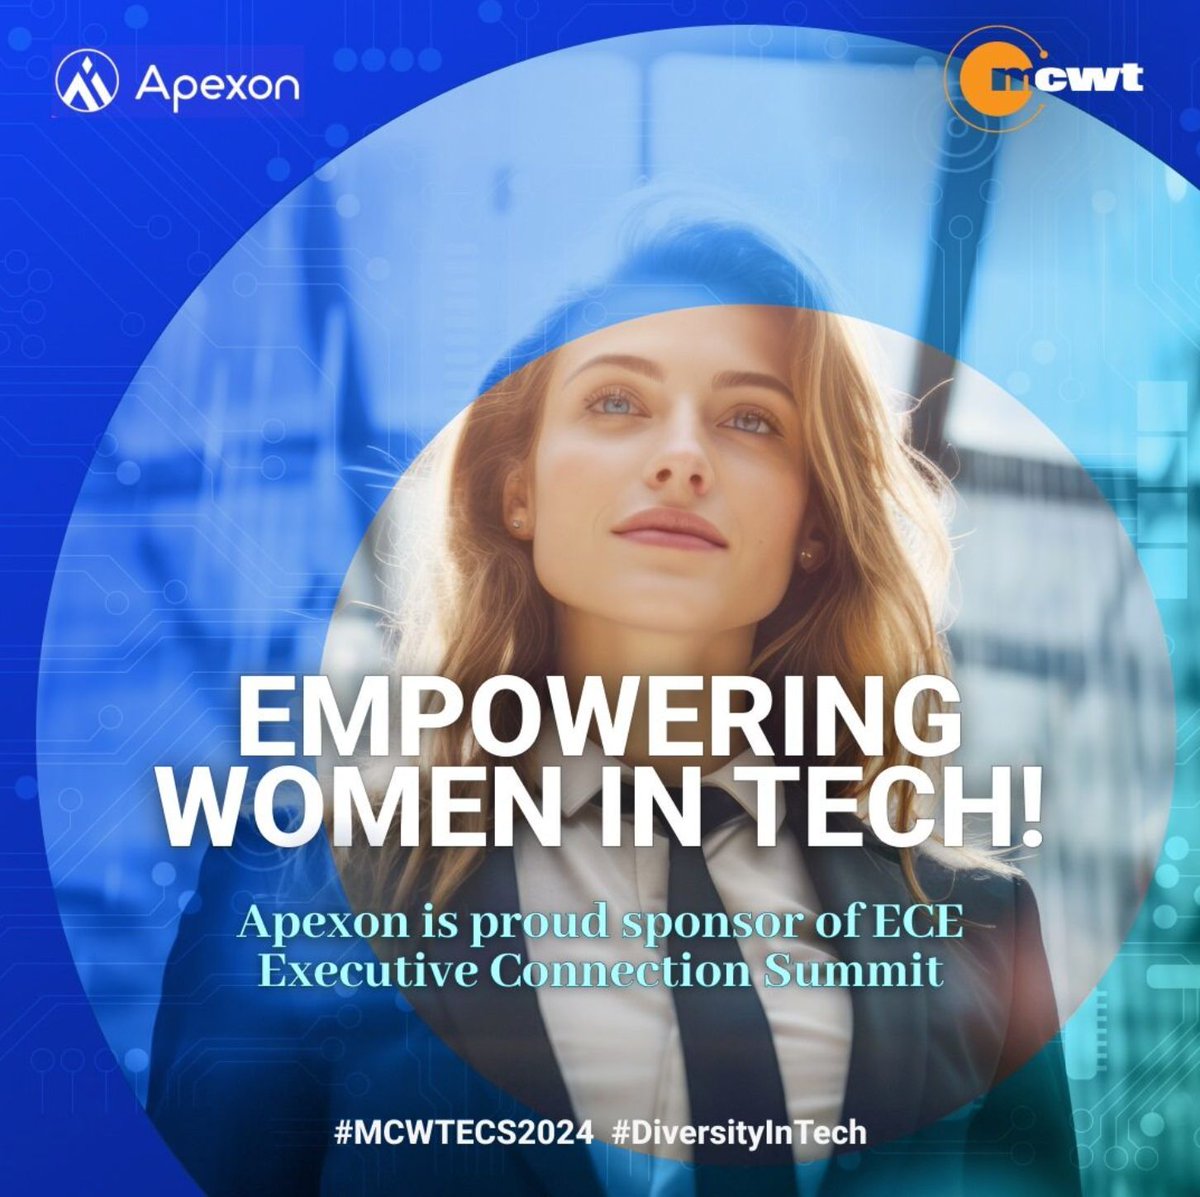 Apexon is excited to support the ECS Executive Connection Summit, presented by the Michigan Council of Women in Technology. Join us on May 14th and be inspired by leading women in the tech industry. 

#MCWTECS2024 #DiversityInTech